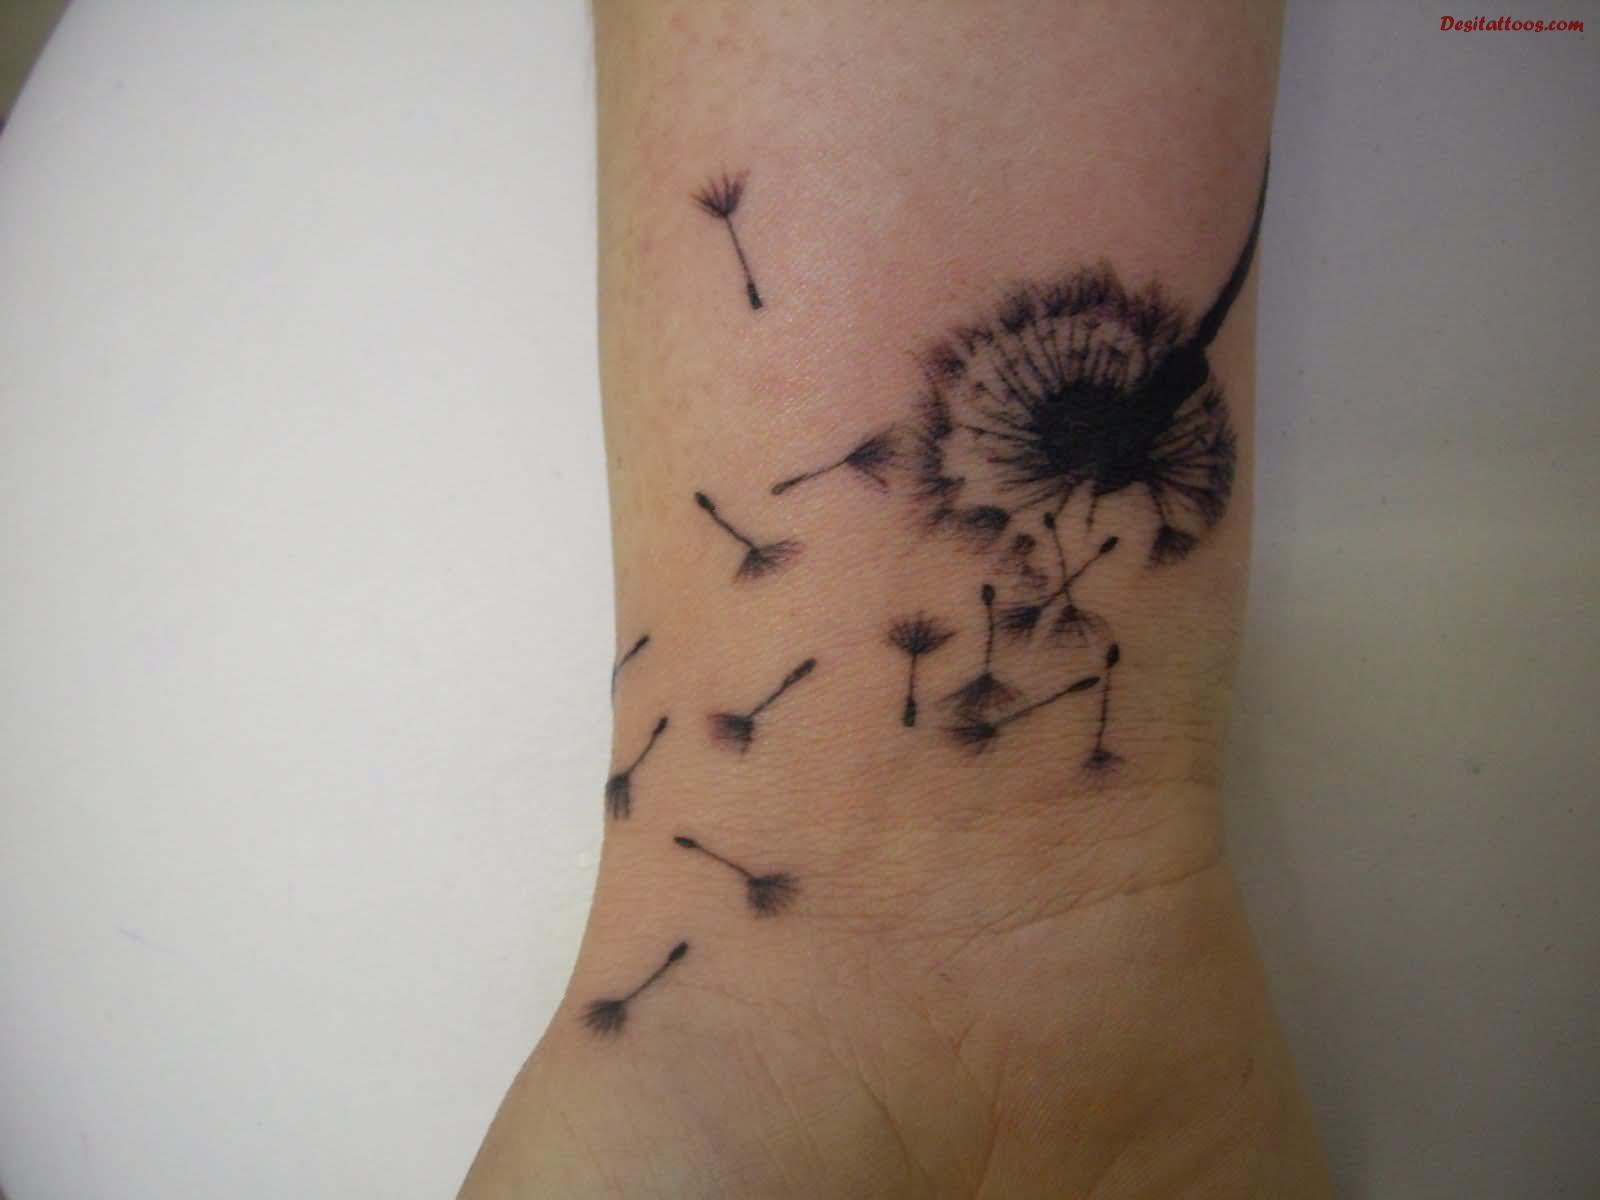 Dandelion Blowing From Puff In Black And Grey Ink Tattoo On Wrist